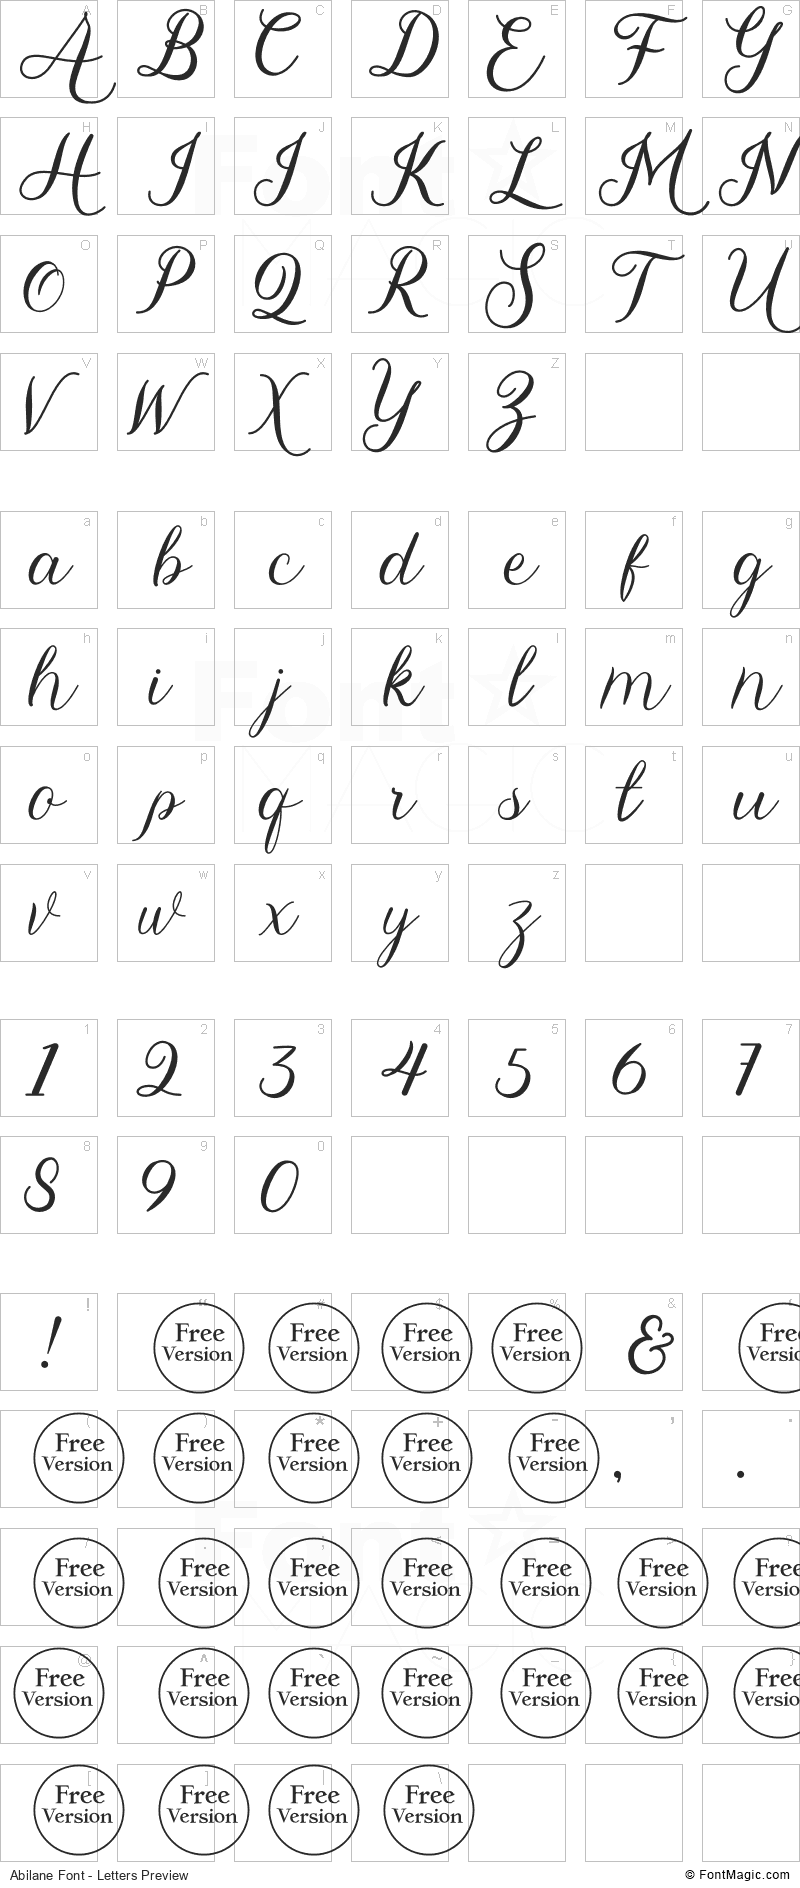 Abilane Font - All Latters Preview Chart